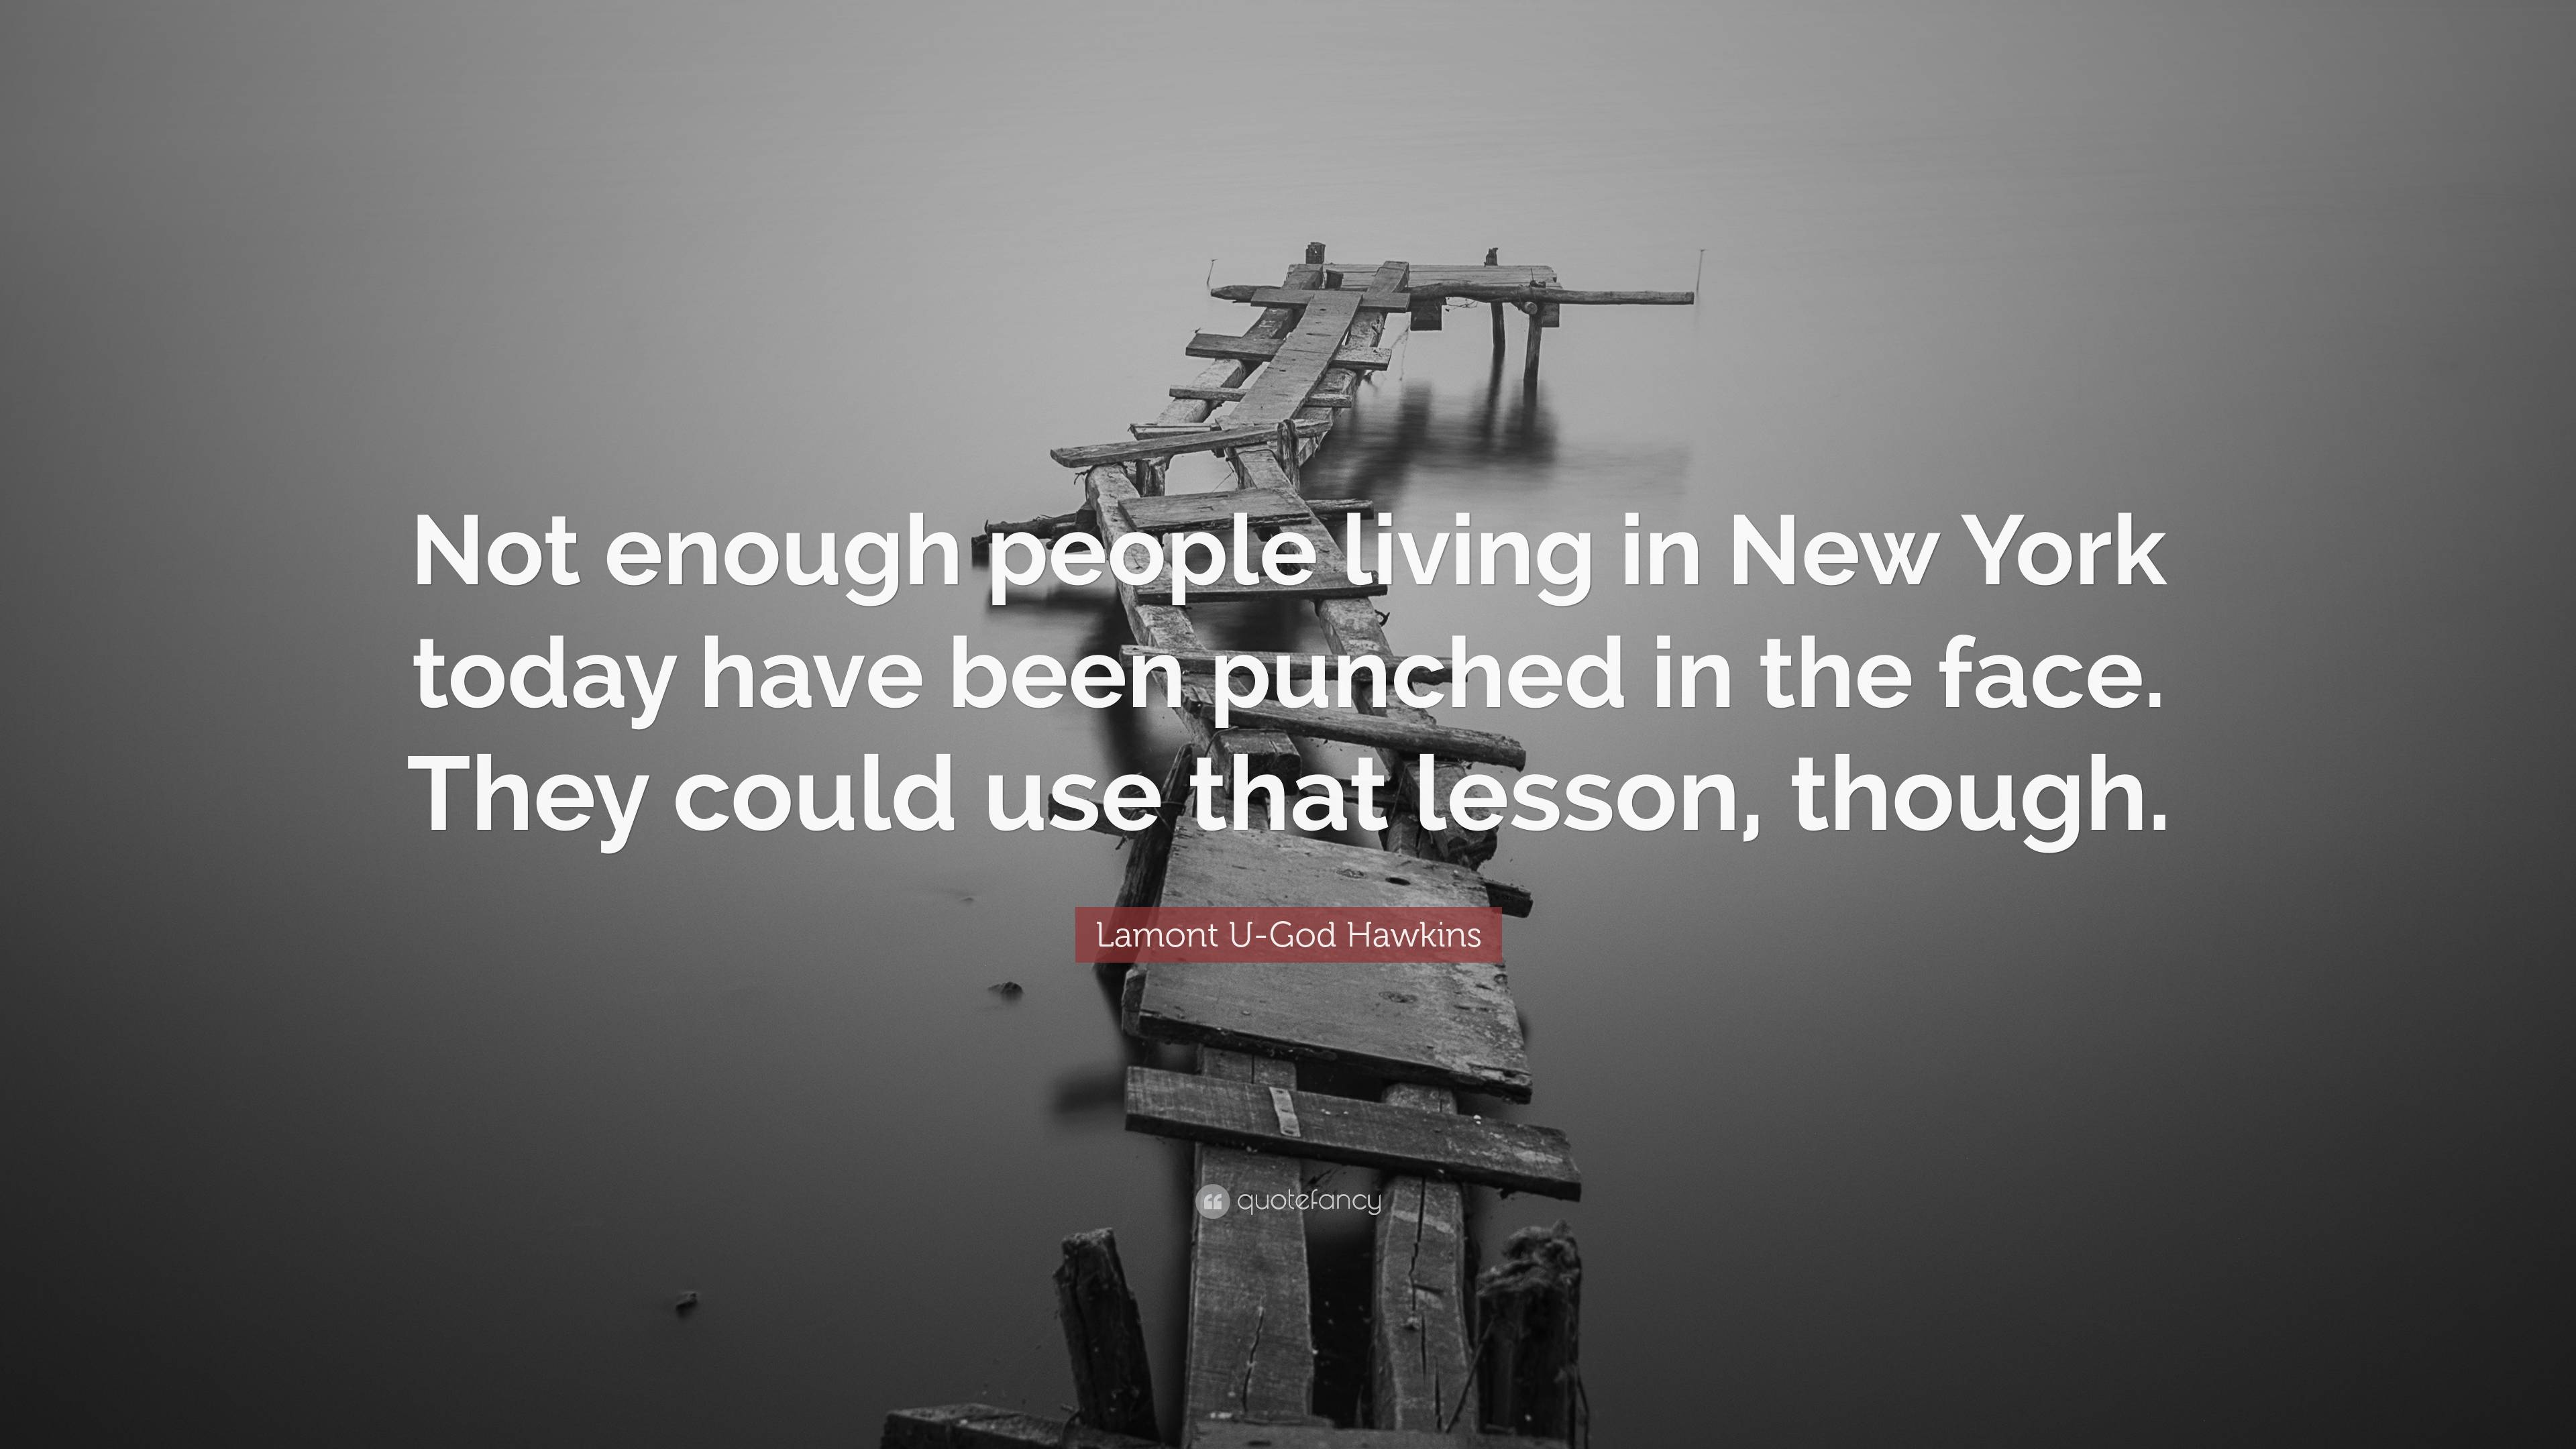 Lamont U-God Hawkins Quote: “Not enough people living in New York today ...